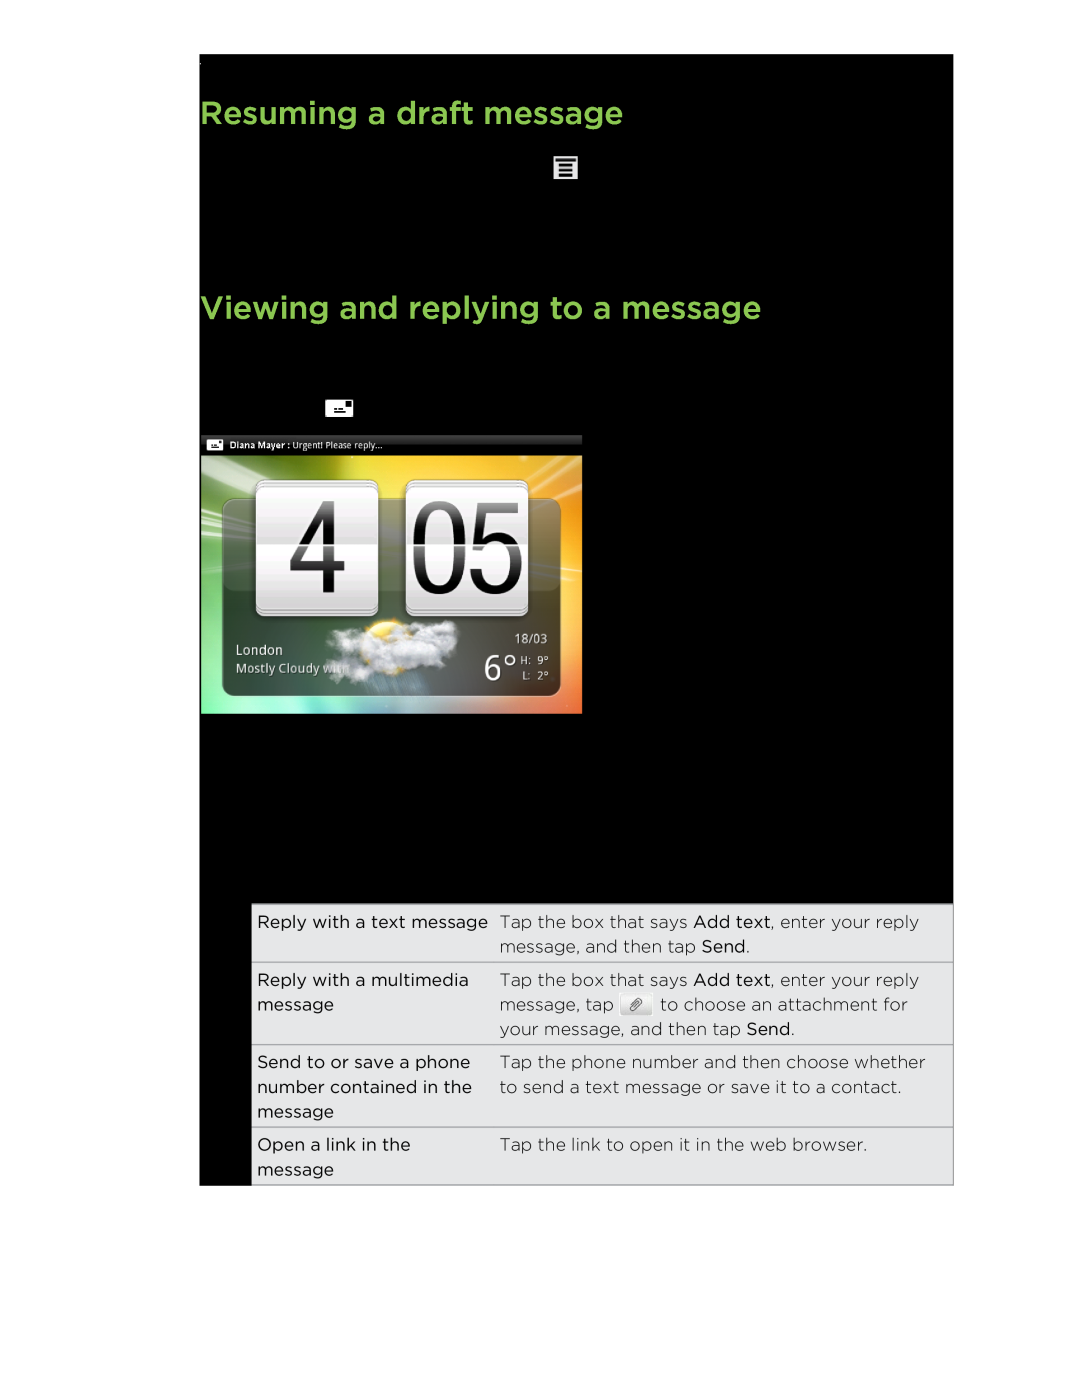 HTC HTCFlyerP512 manual Resuming a draft message, Viewing and replying to a message 